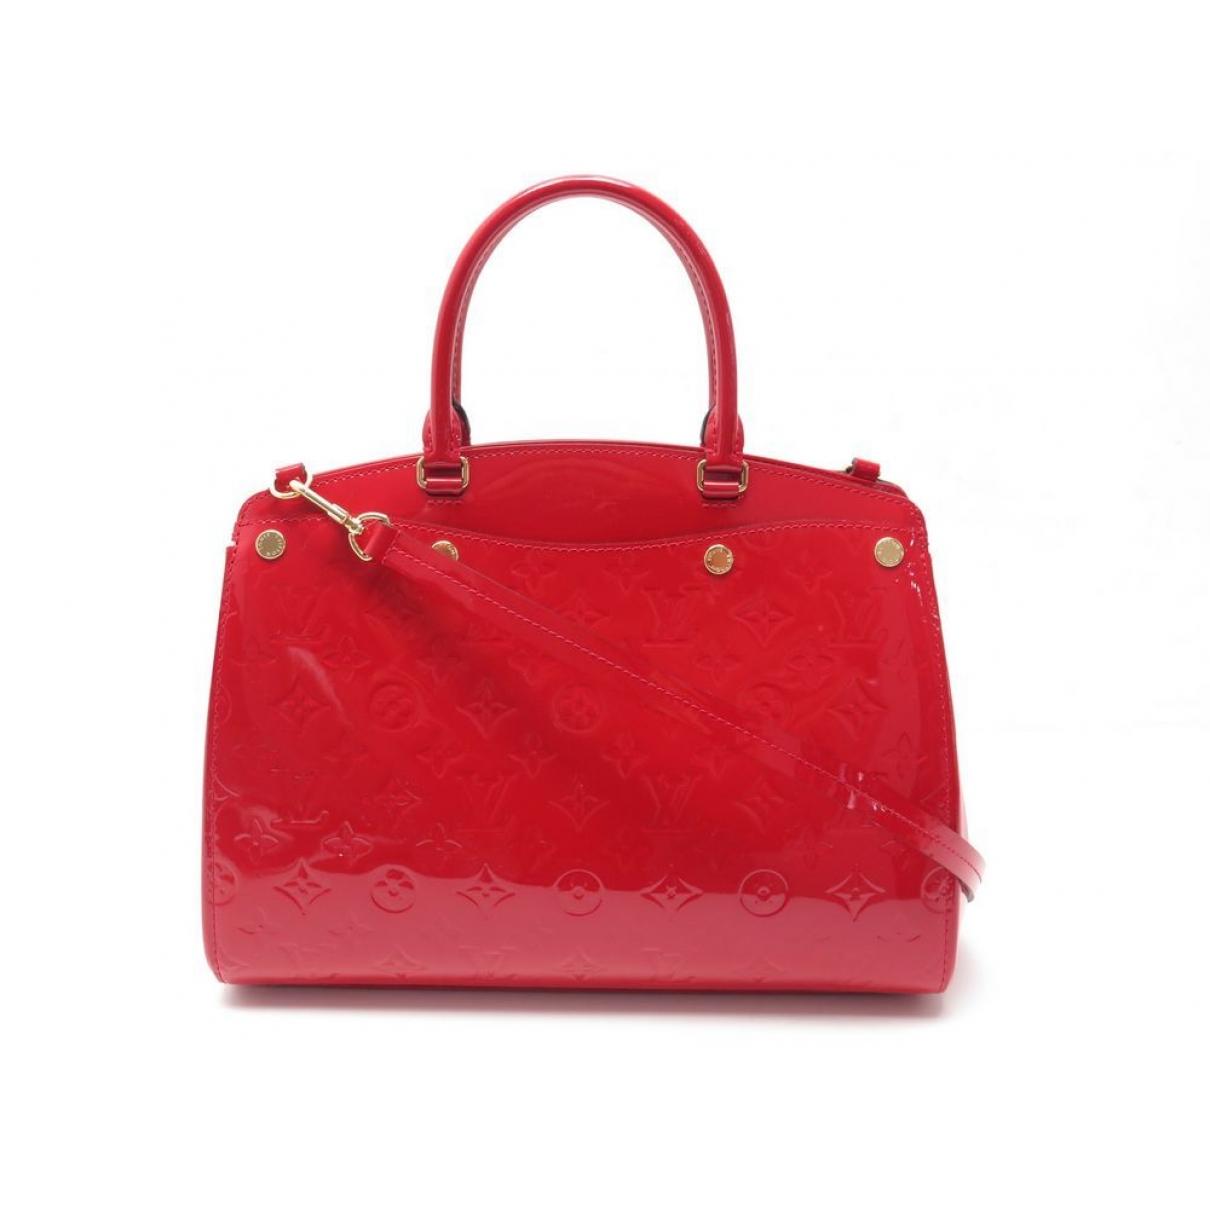 Lyst - Louis Vuitton Pre-owned Bréa Red Patent Leather Handbags in Red